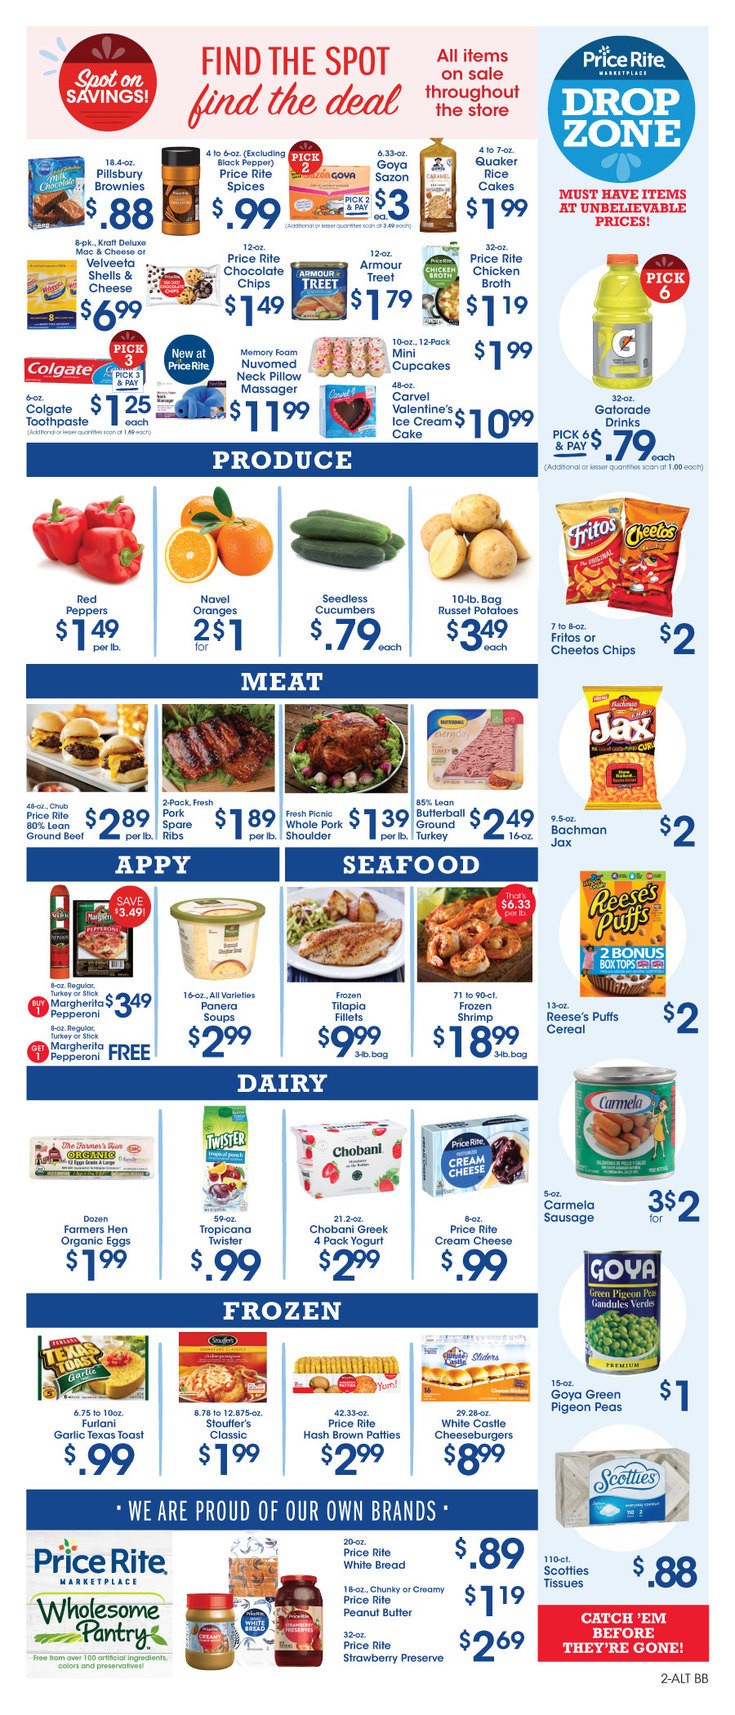 Price Rite Weekly Ad from February 7